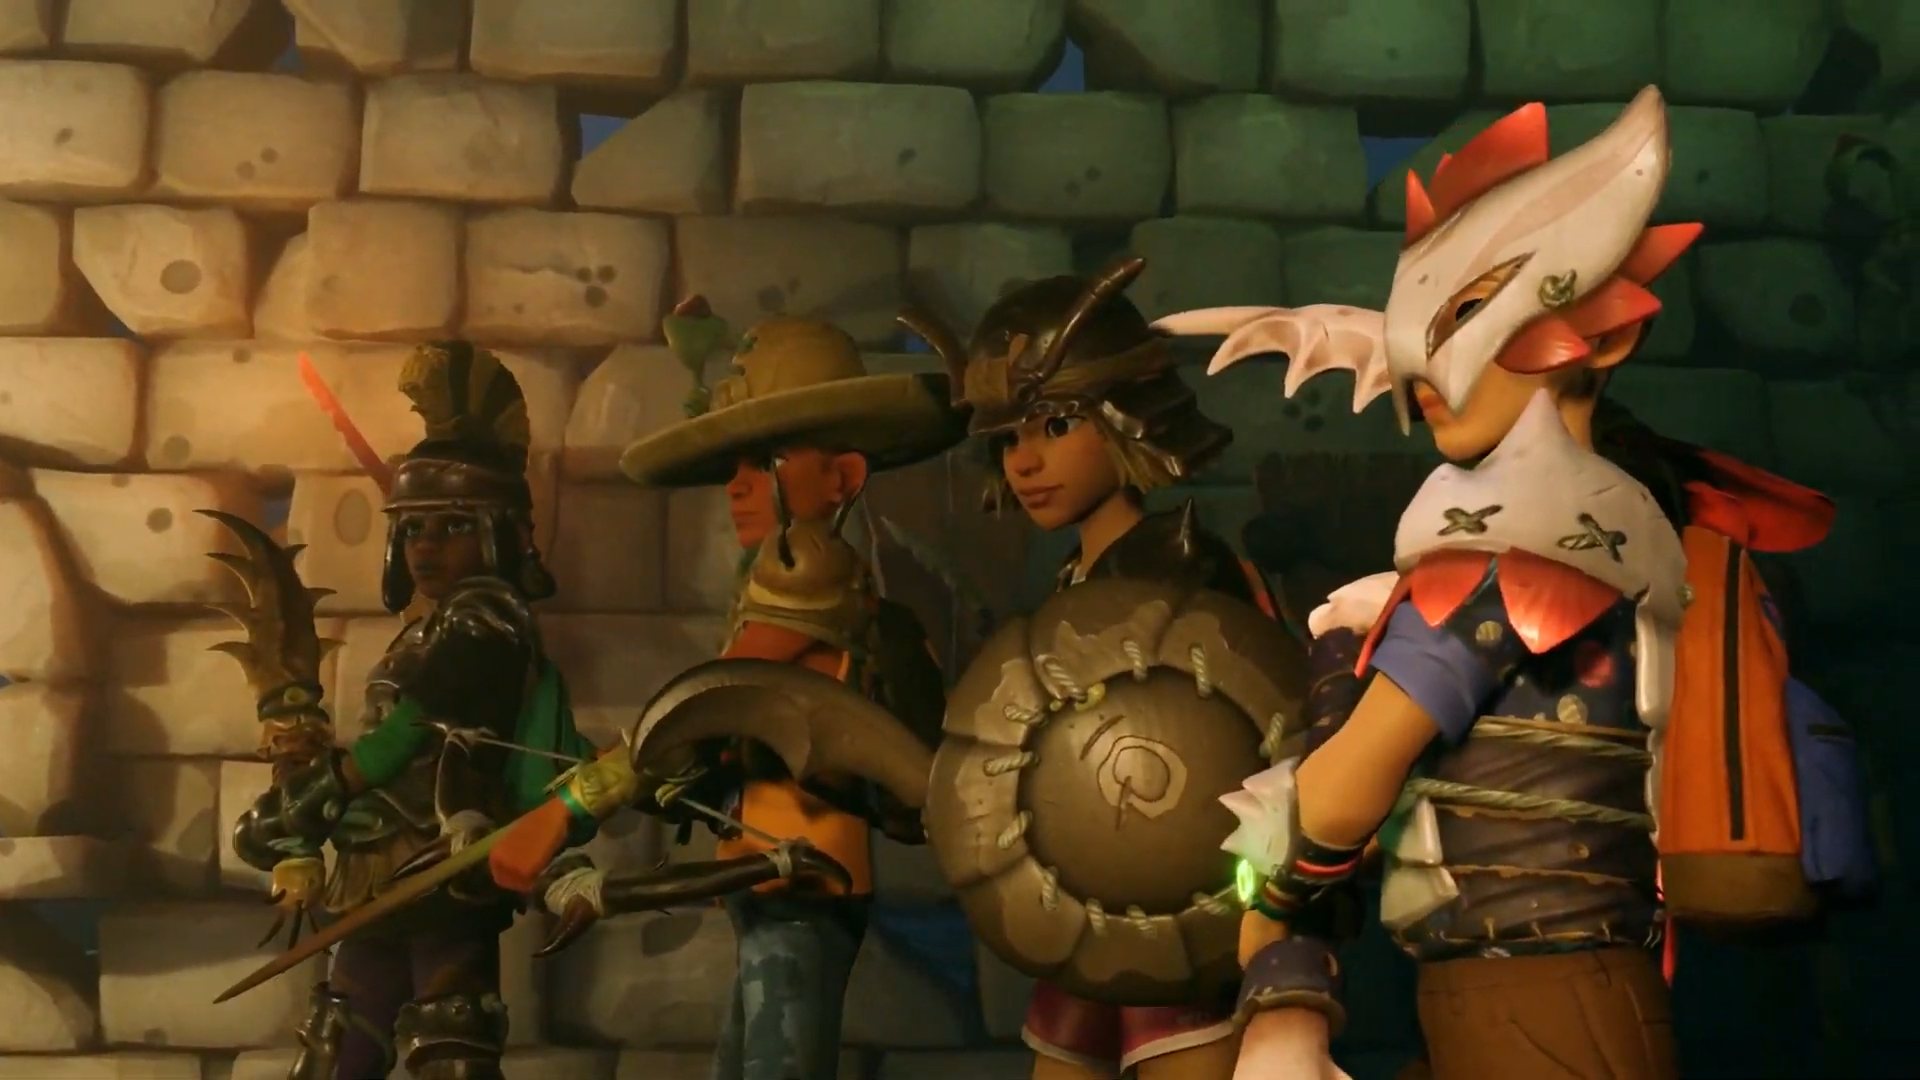 Four Grounded characters stand side by side against a brick wall